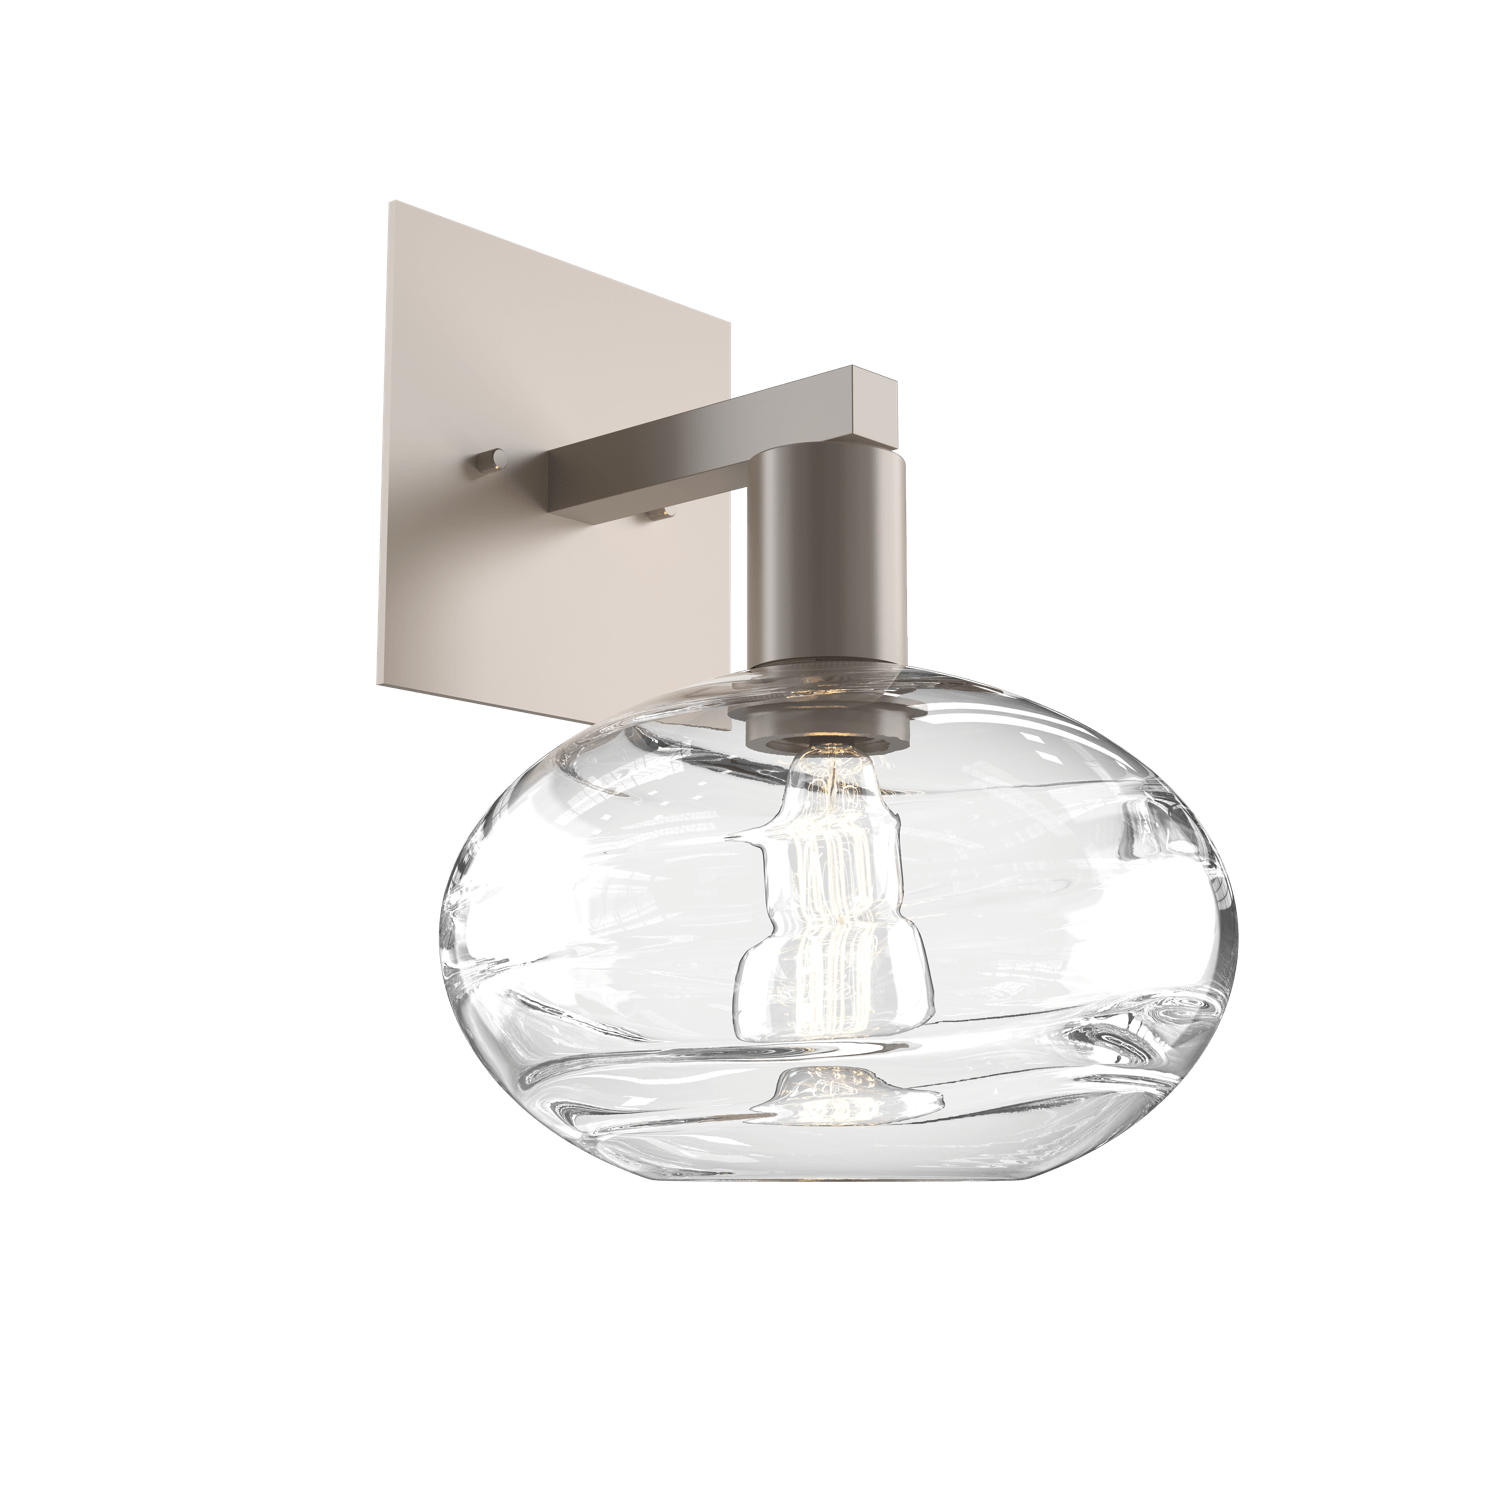 IDB0036-11-BS-OC-Hammerton-Studio-Optic-Blown-Glass-Coppa-wall-sconce-with-metallic-beige-silver-finish-and-optic-clear-blown-glass-shades-and-incandescent-lamping